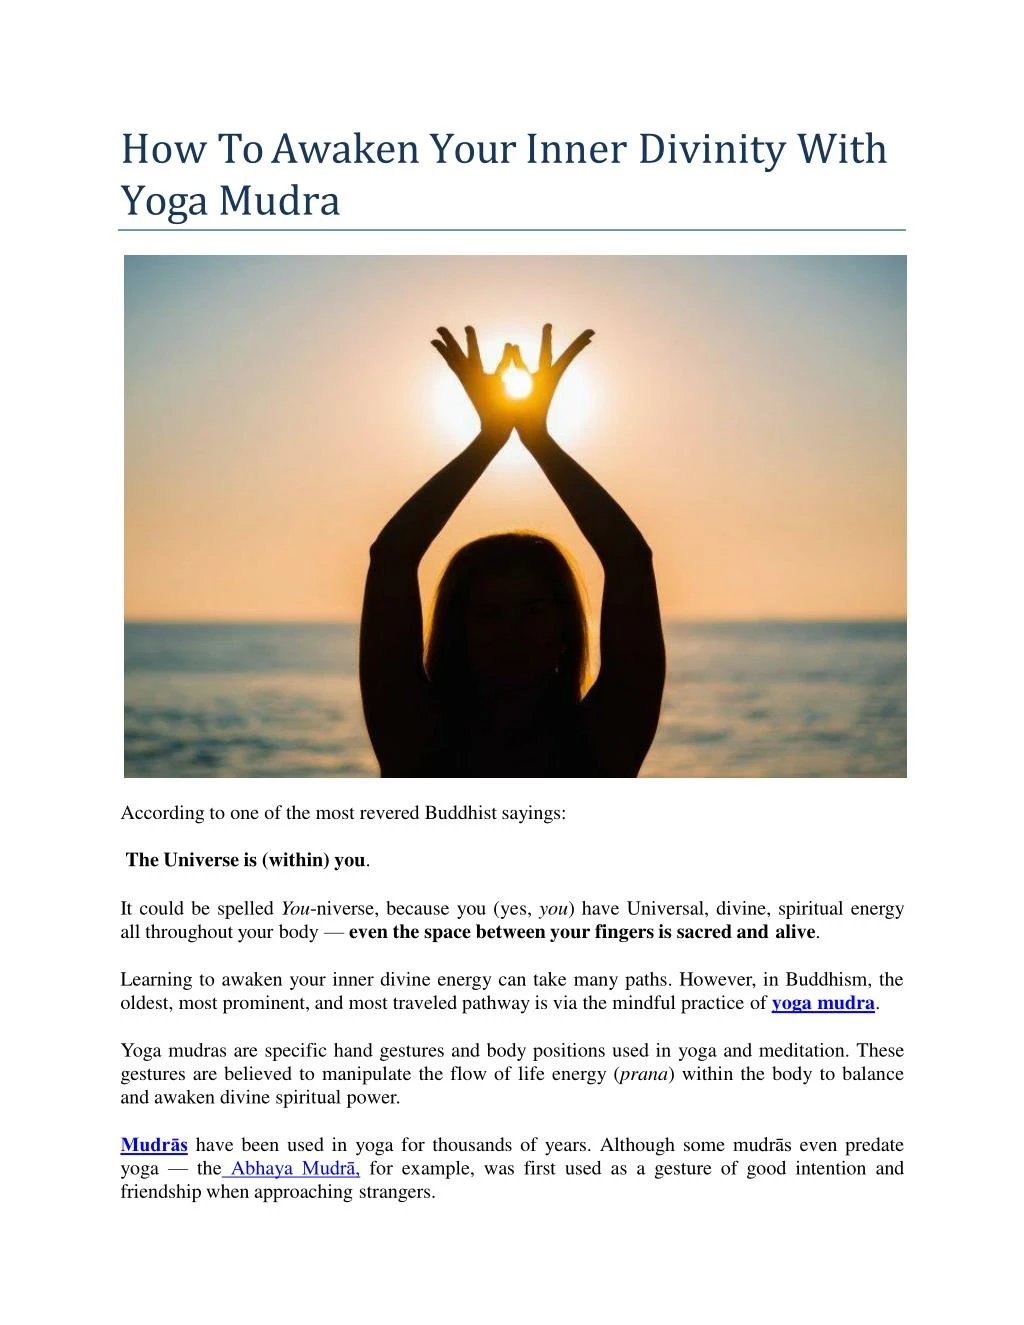 how to awaken your inner divinity with yoga mudra